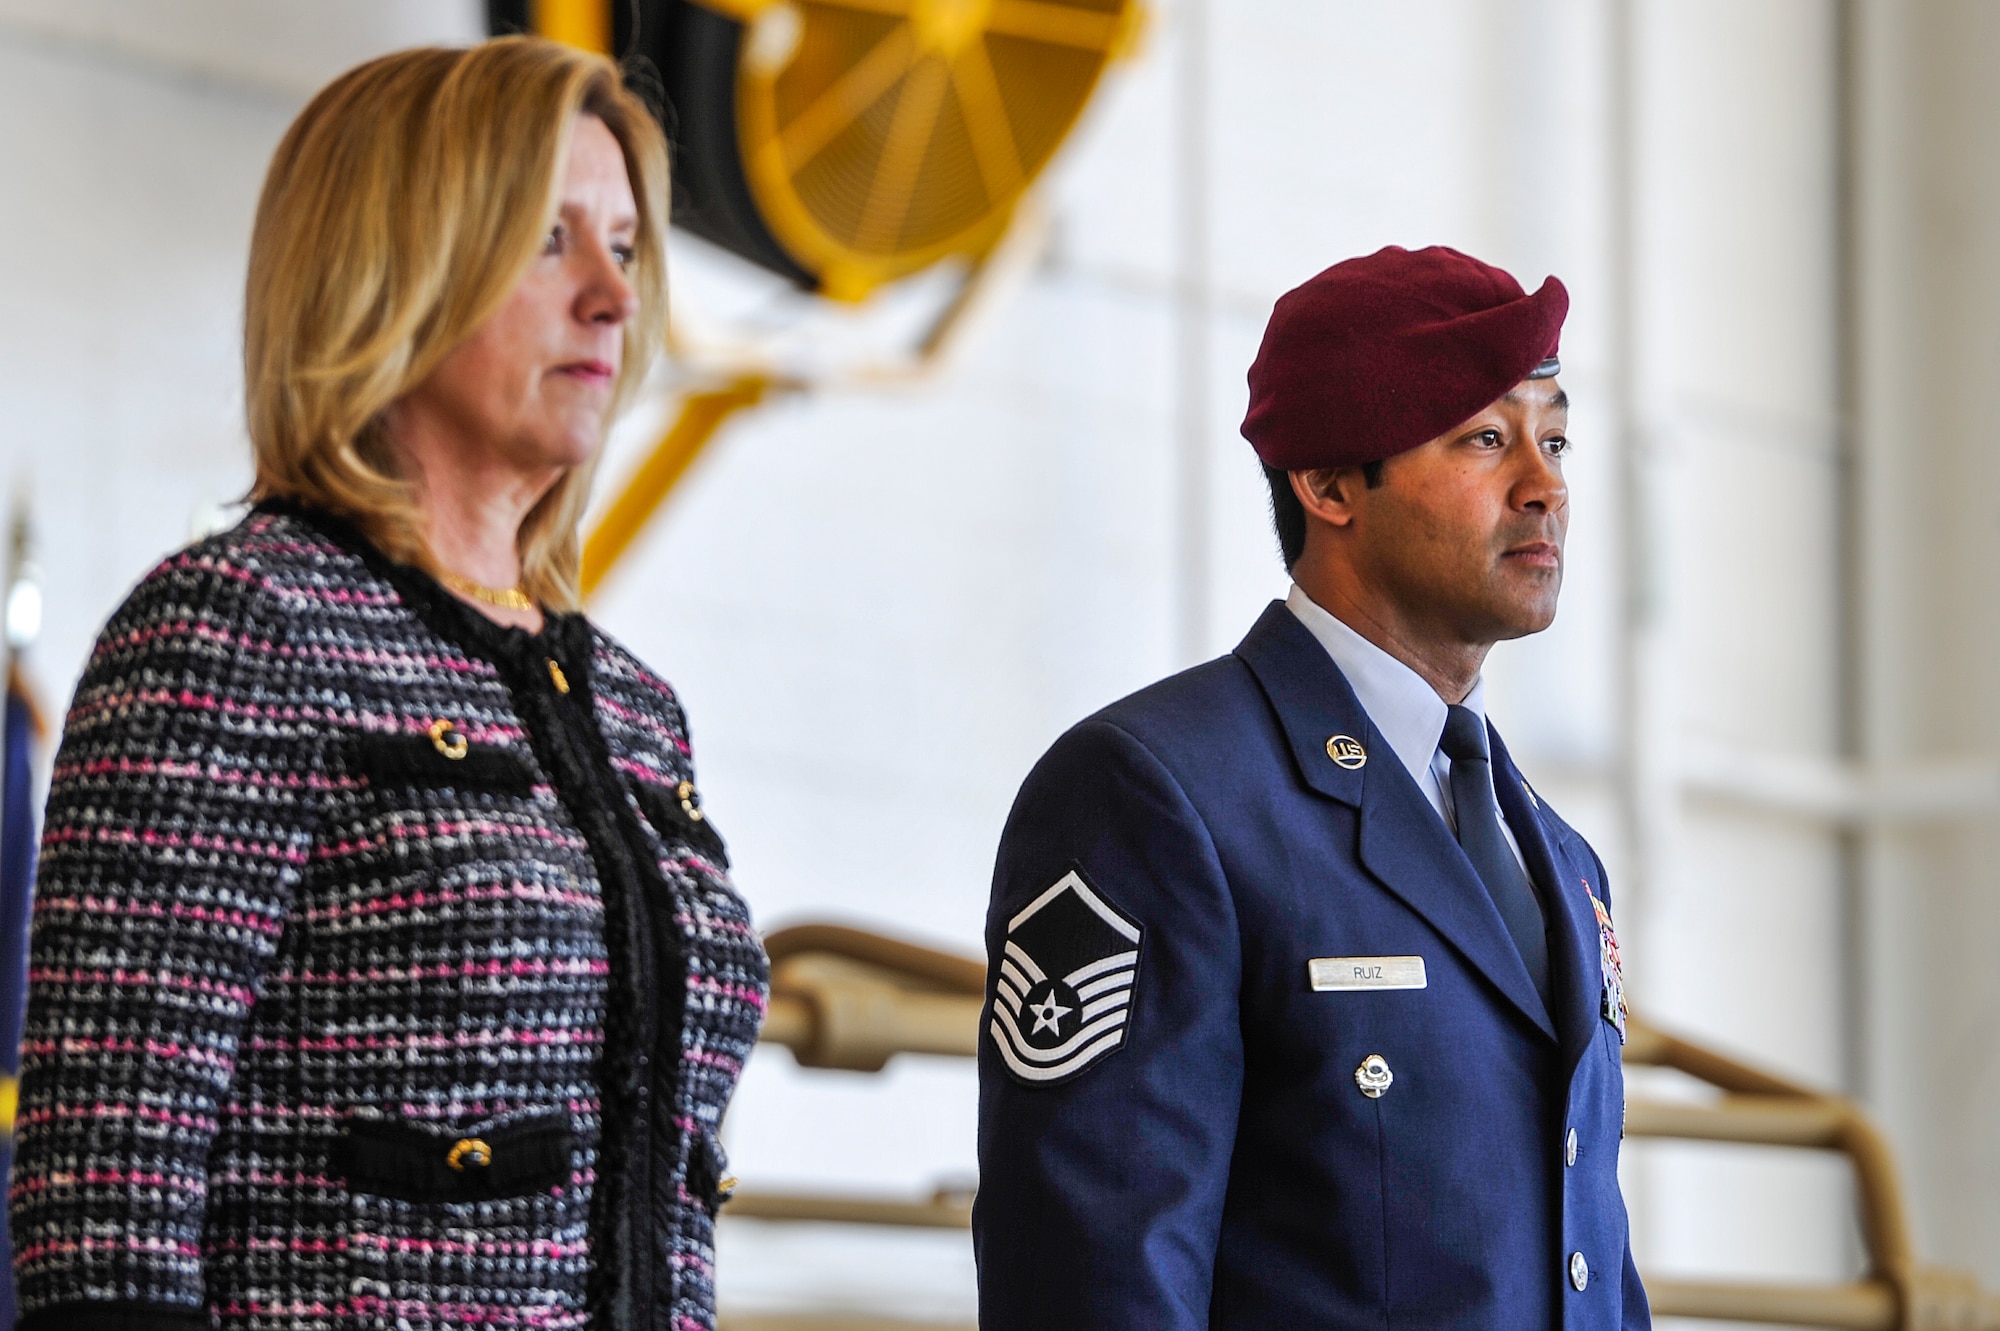 Secretary of the Air Force Deborah Lee James and Master Sgt. Ivan Ruiz, a pararescueman from the 56th Rescue Squadron, Royal Air Force Lakenheath, England, listen to the award citation during an Air Force Cross ceremony at the Freedom Hangar on Hurlburt Field, Fla., Dec. 17, 2014. During a 2013 deployment to Afghanistan, Ruiz protected injured special operations forces with fire support and provided emergency medical care under intense enemy fire in the dark, directly resulting in two U.S. lives saved. The last six Air Force Crosses have all been awarded to AFSOC Special Tactics Airmen.  (U.S. Air Force photo/Airman 1st Class Jeff Parkinson)